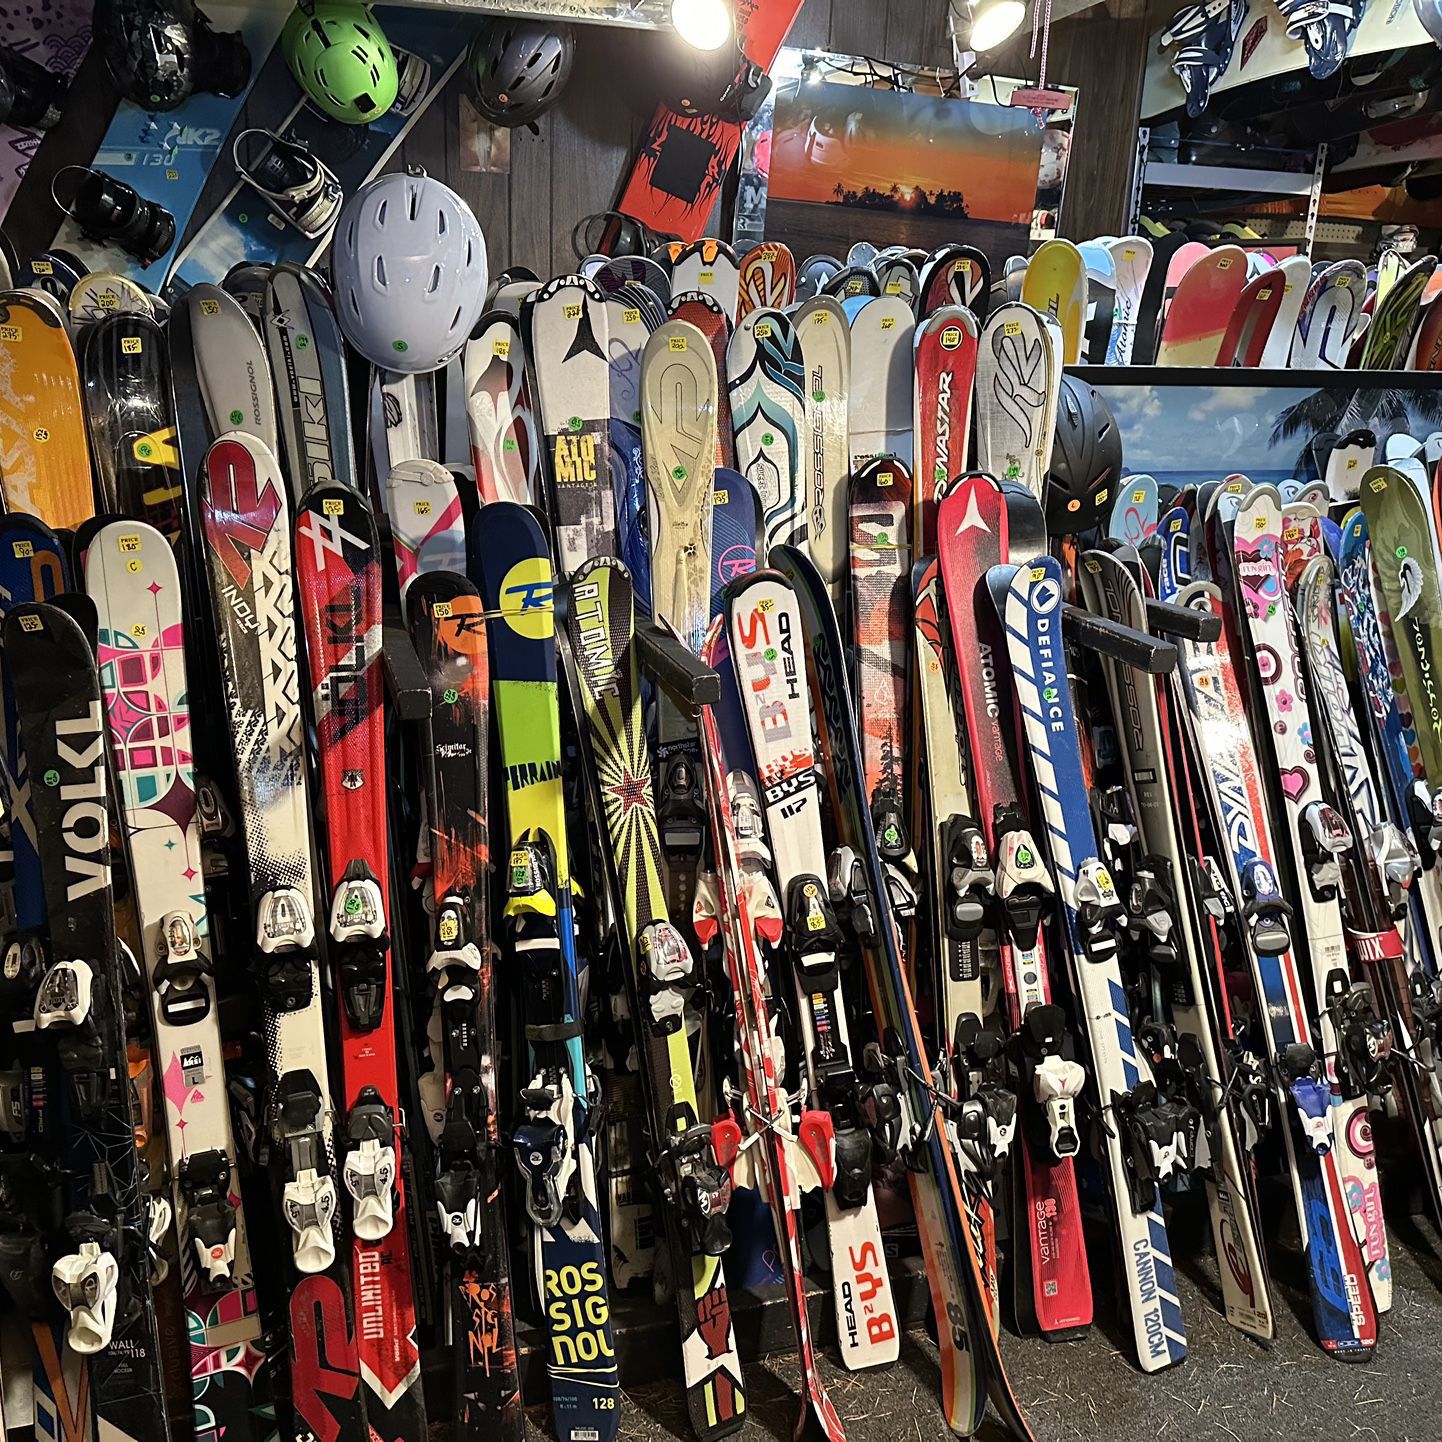 ski and snow gear at unbeatable prices with Maui Ski and Golf!